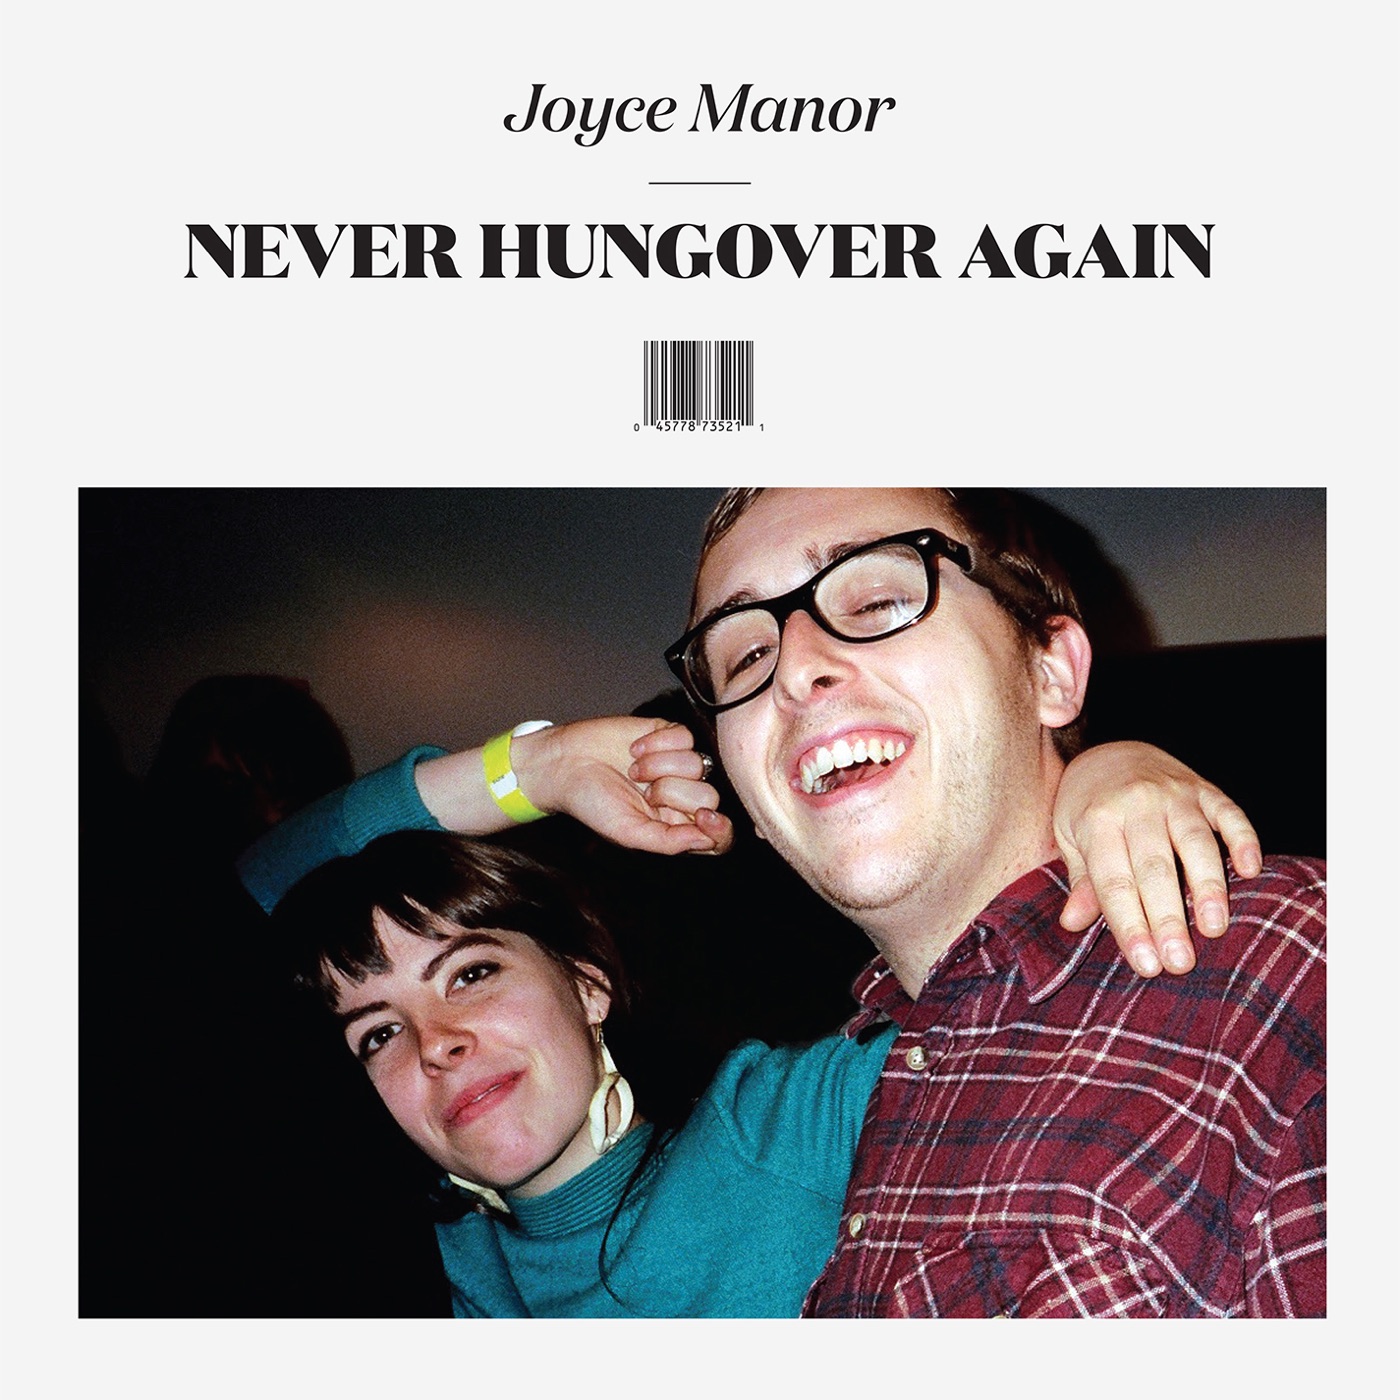 Never Hungover Again by Joyce Manor